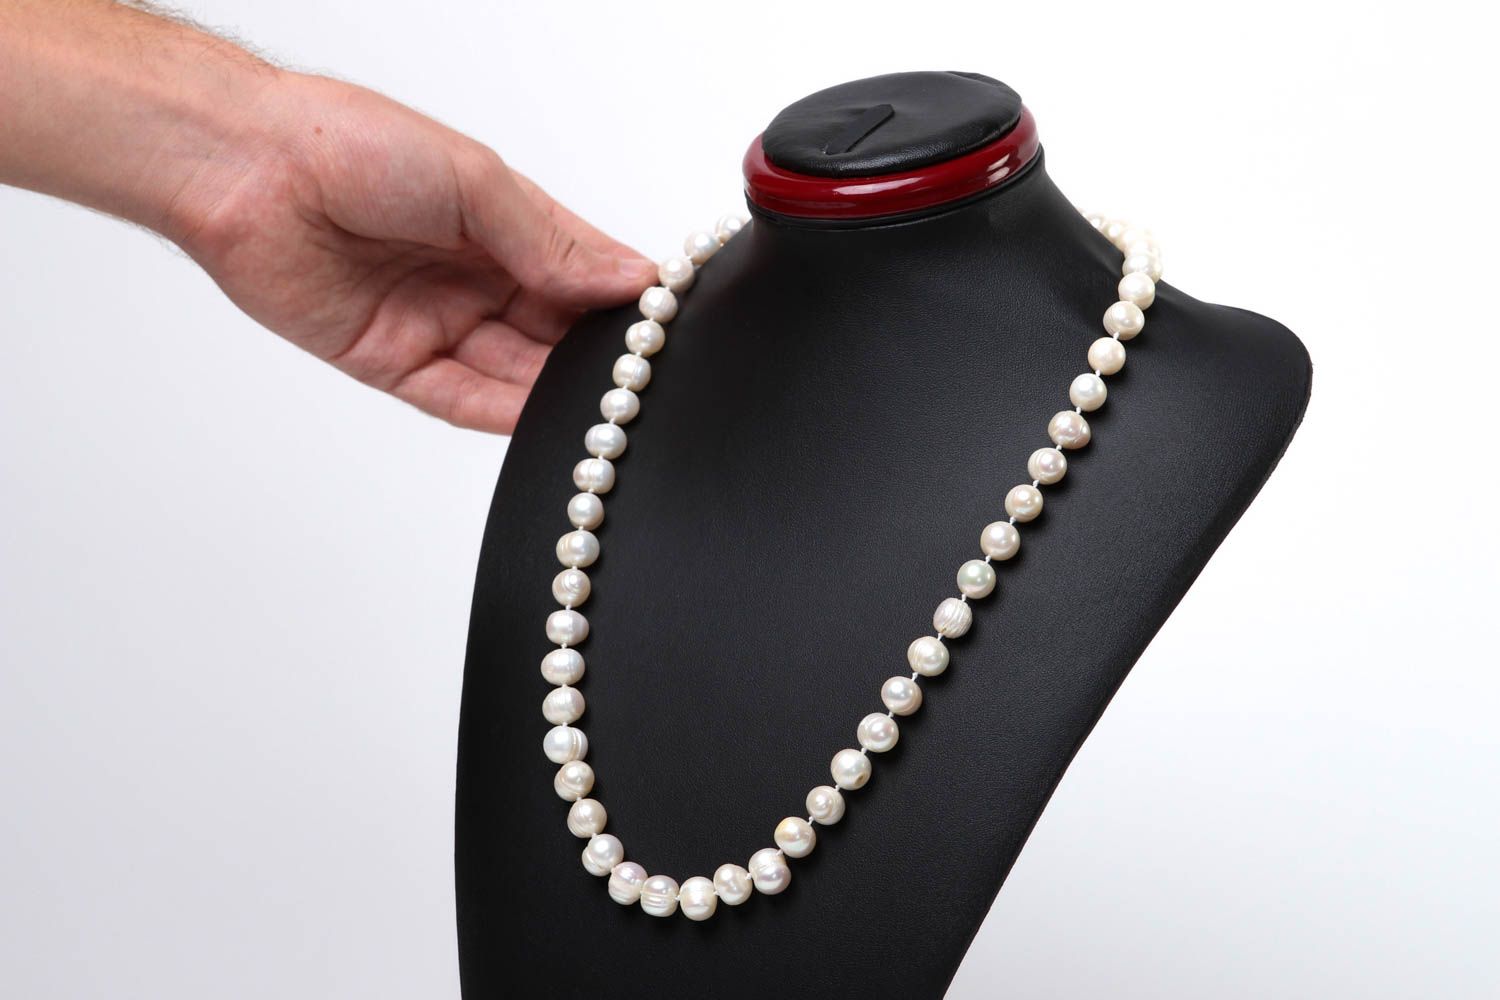 Handmade necklace pearl necklace designer jewelry womens accessories gift ideas photo 5